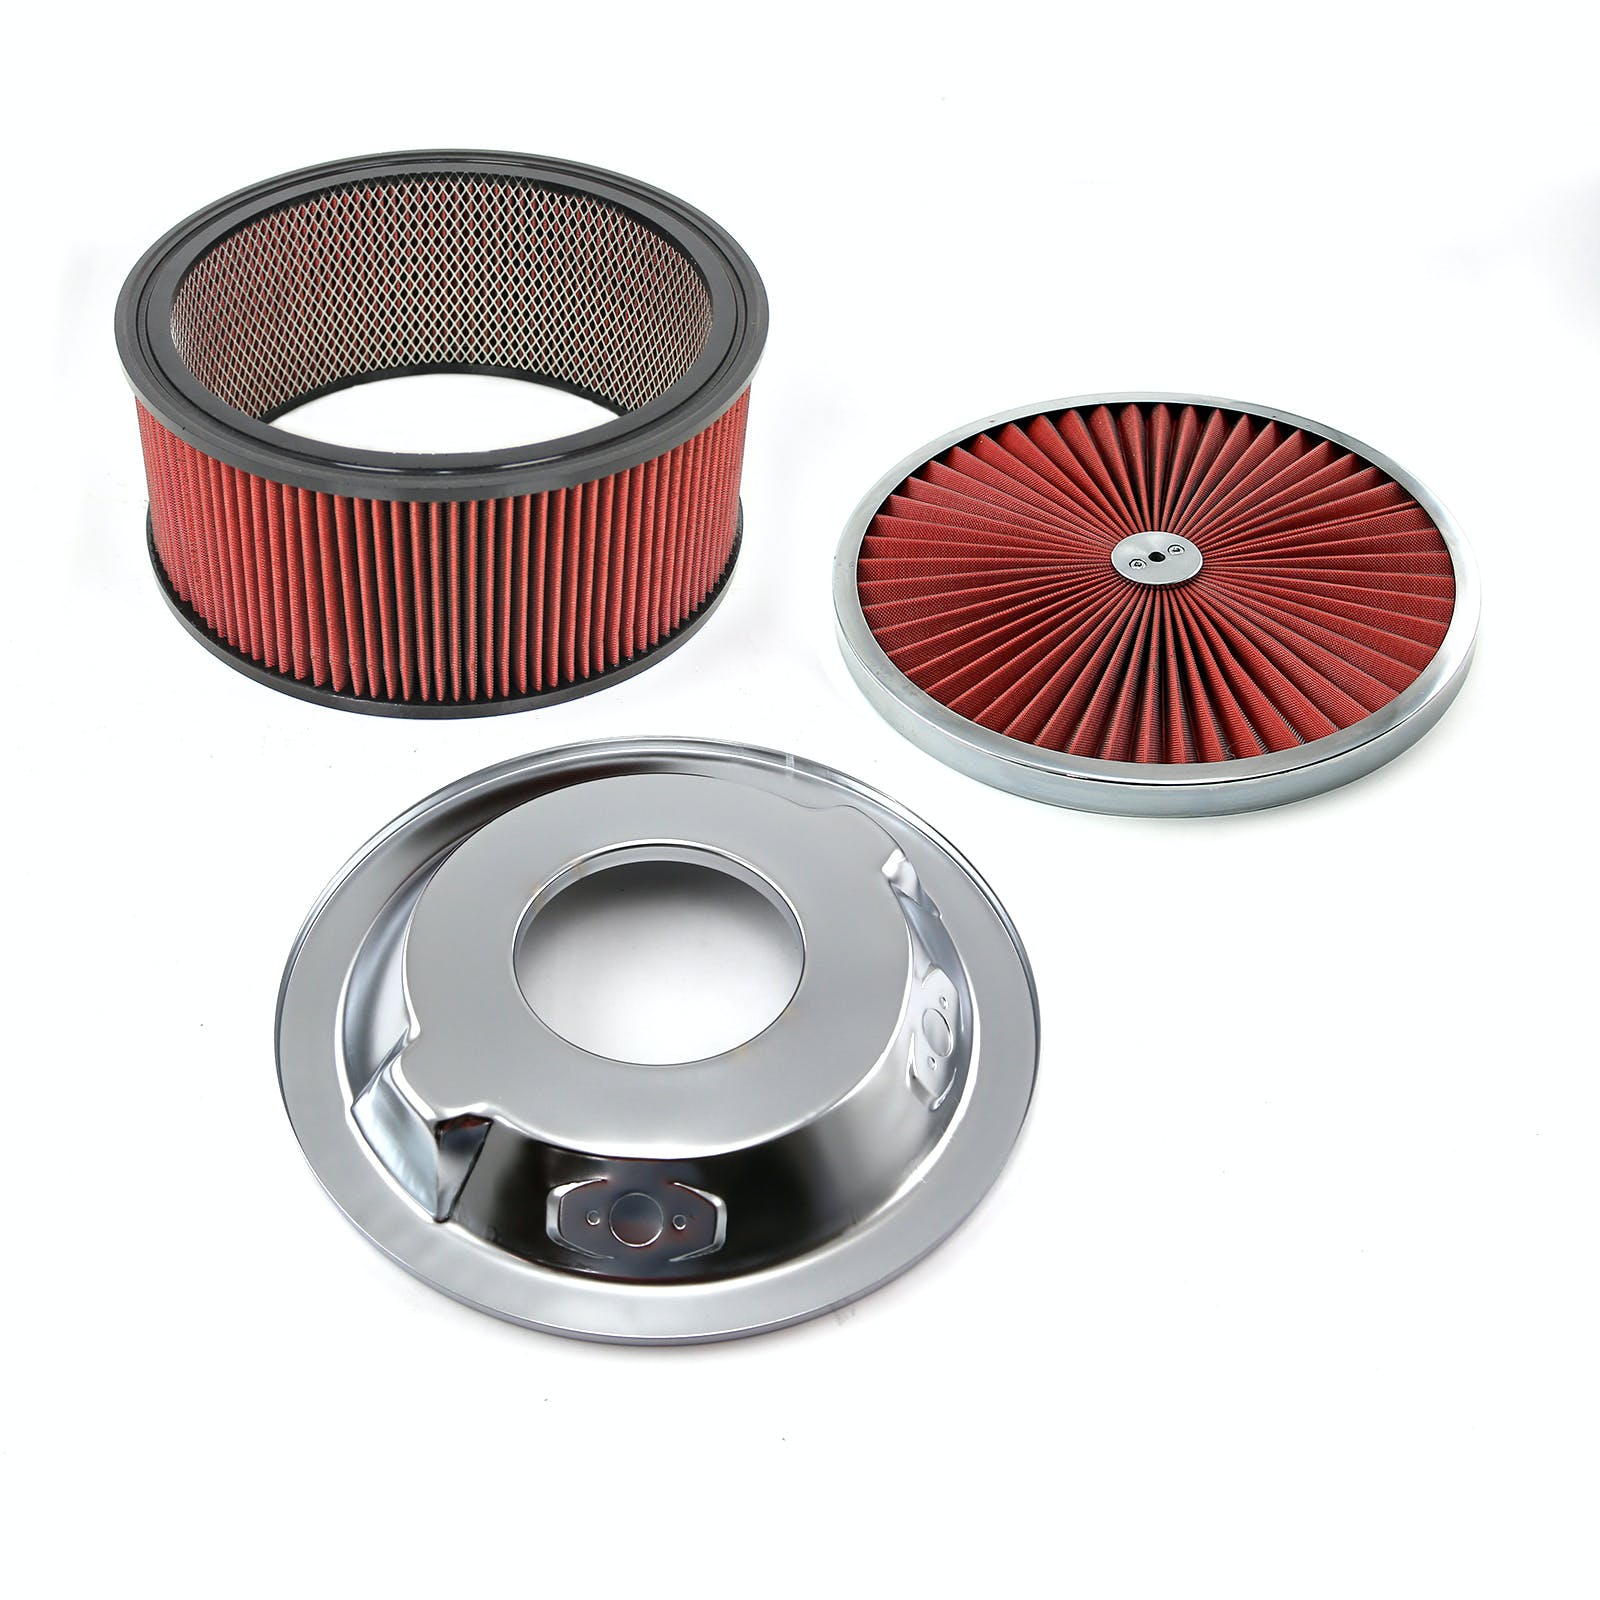 Speedmaster PCE104.1045 14 x 6 Washable Element Extreme Top w/Chrome Ring Dropped Base Air Cleaner Kit